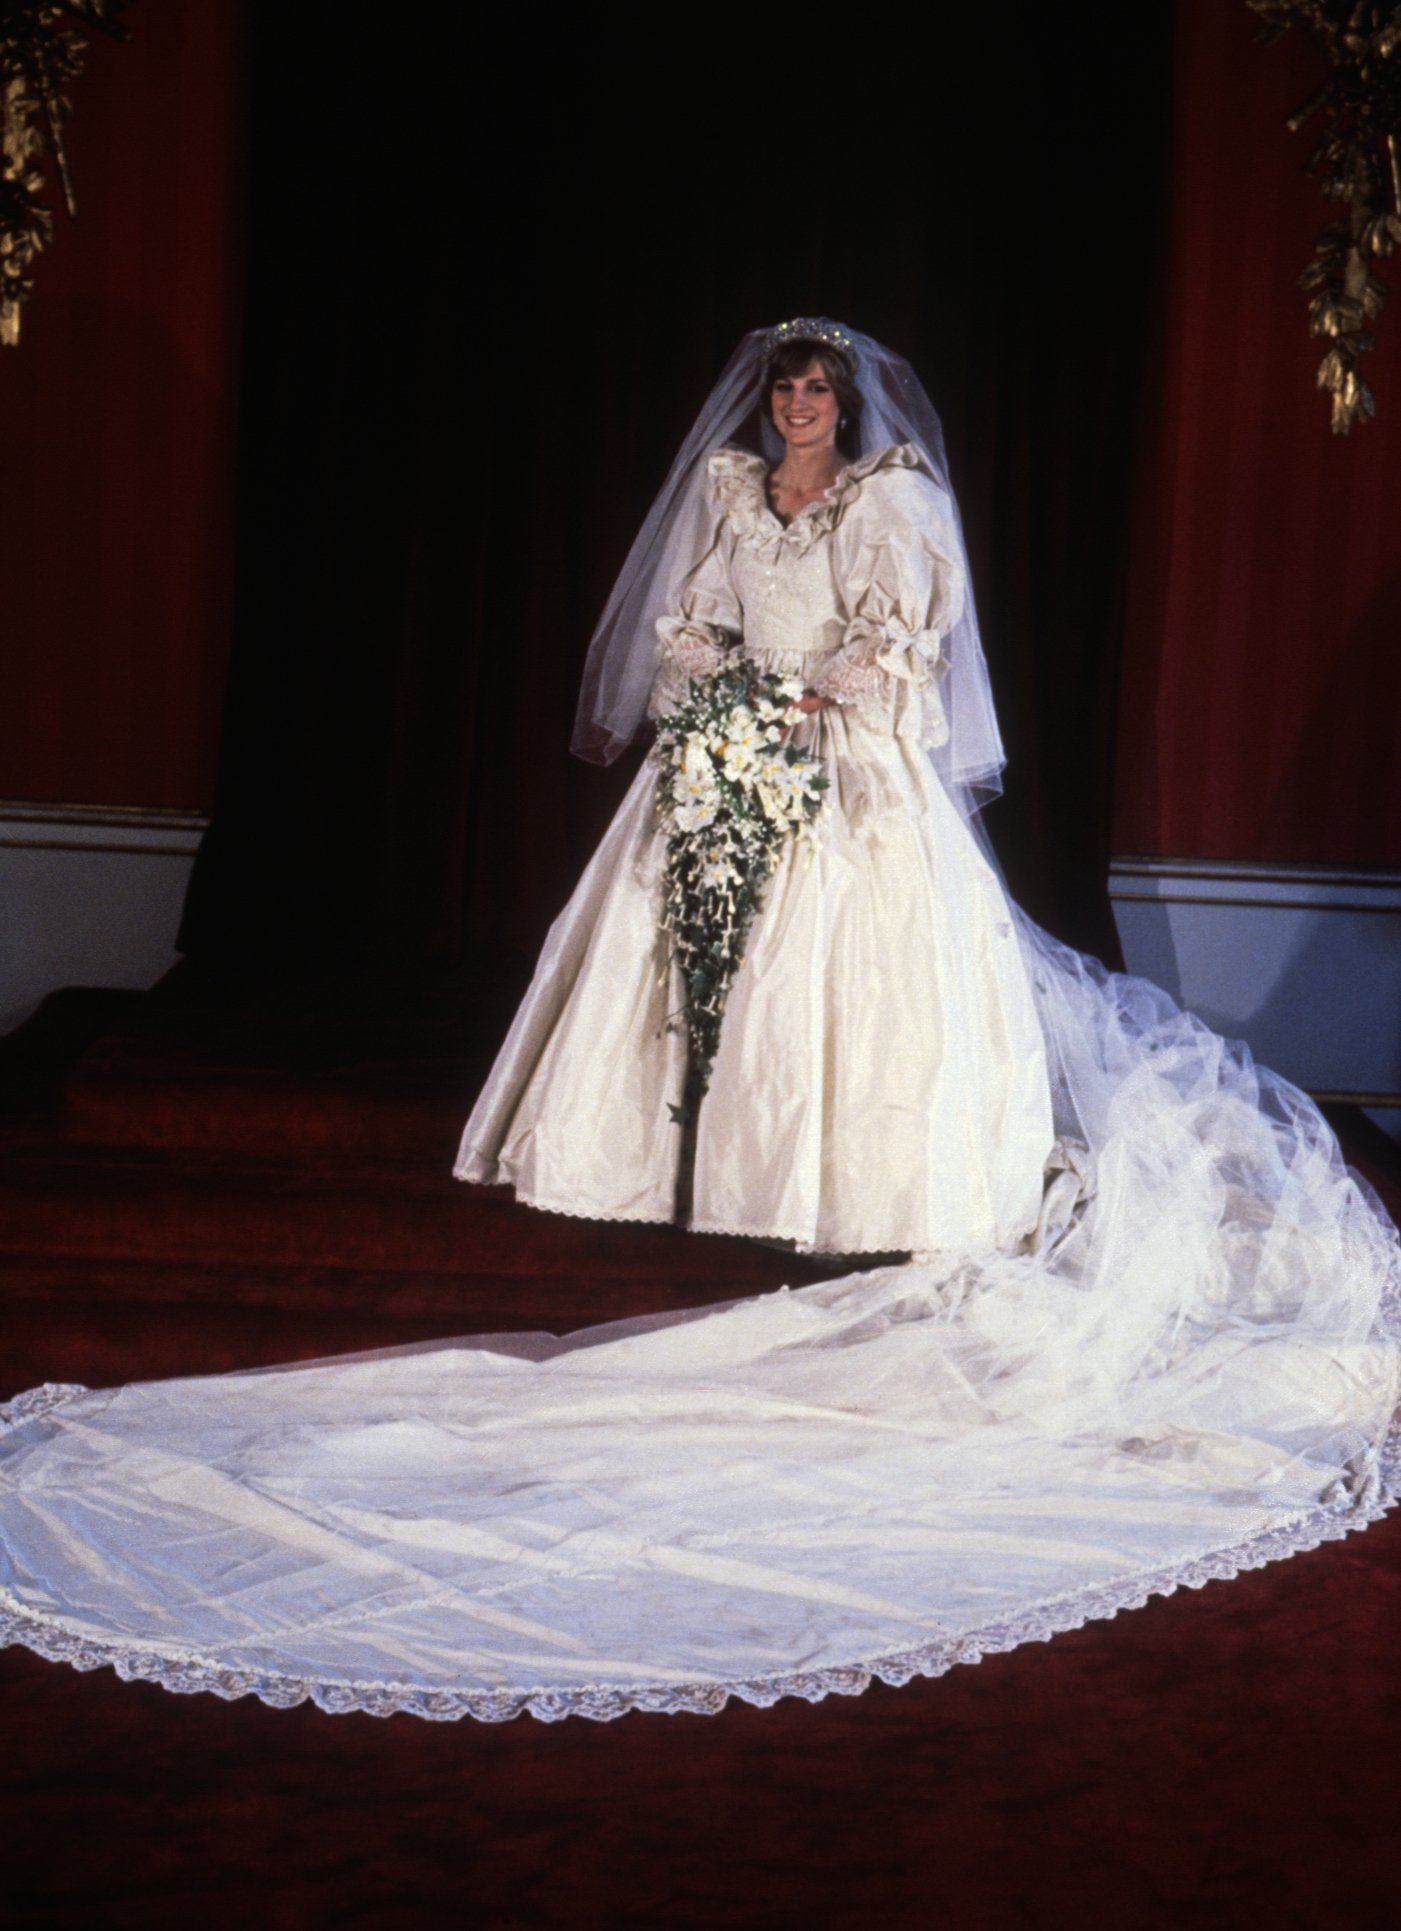 Diana, Princess of Wales, in her bridal dress on the day of her wedding to Prince Charles.| Source: Getty Images